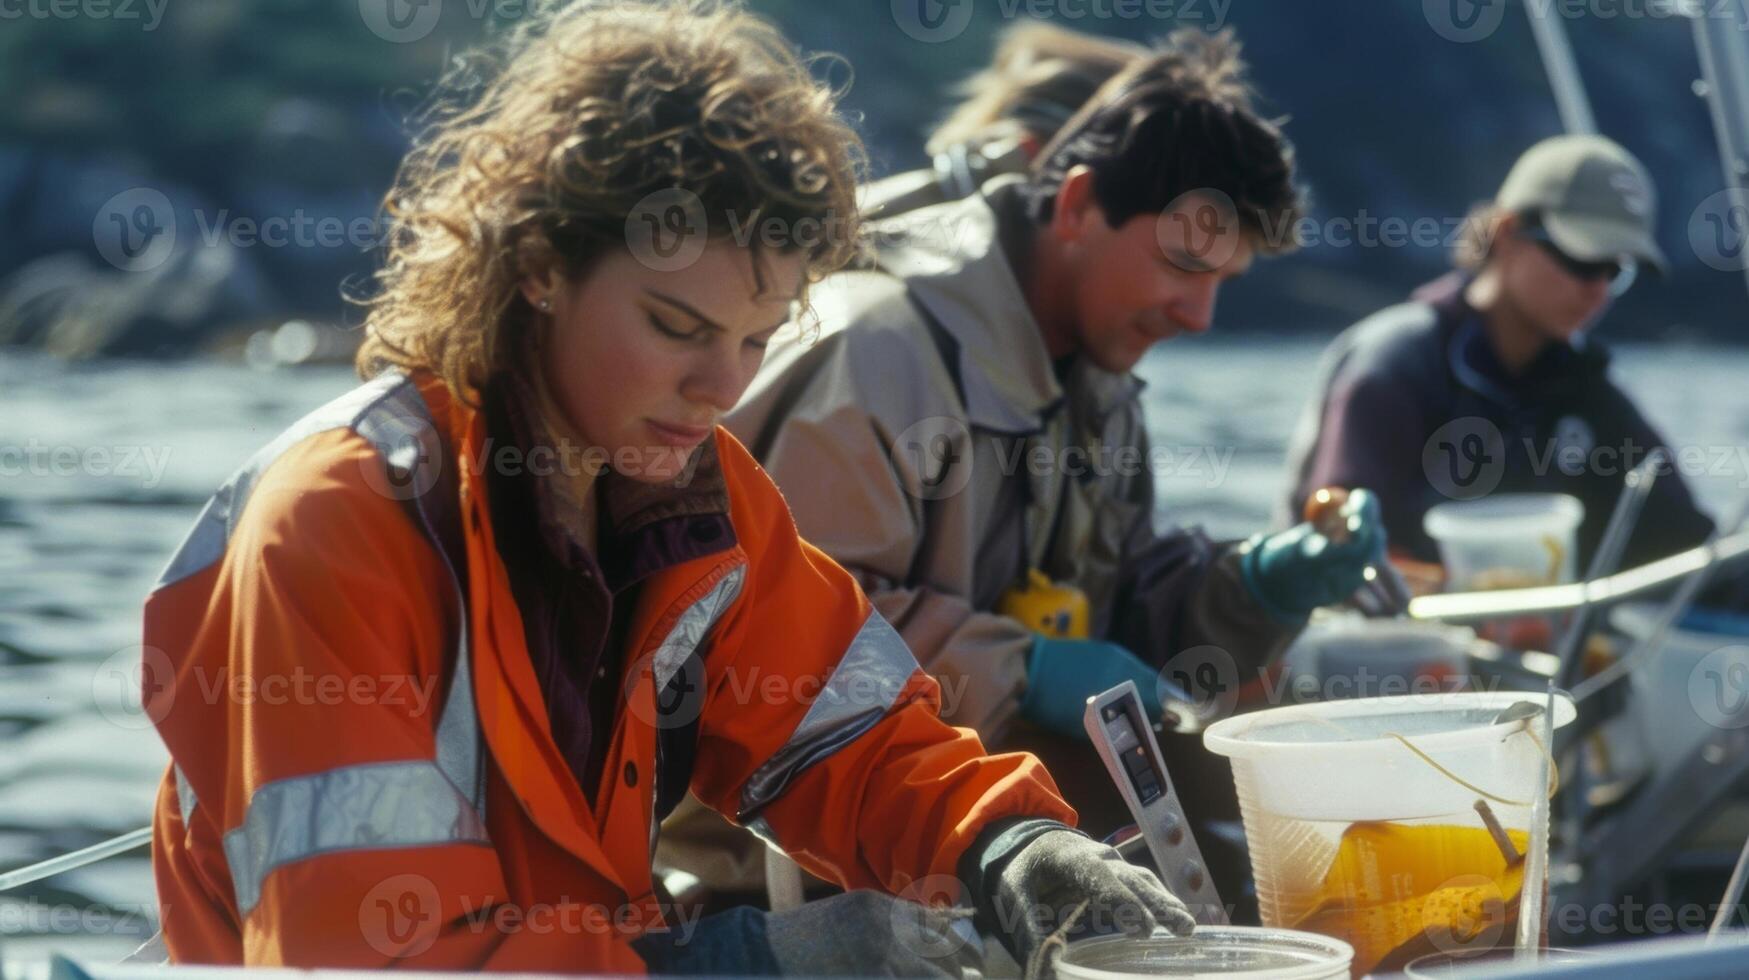 A team of marine biologists conducting research and collecting data on the health and population of various fish species in the region photo